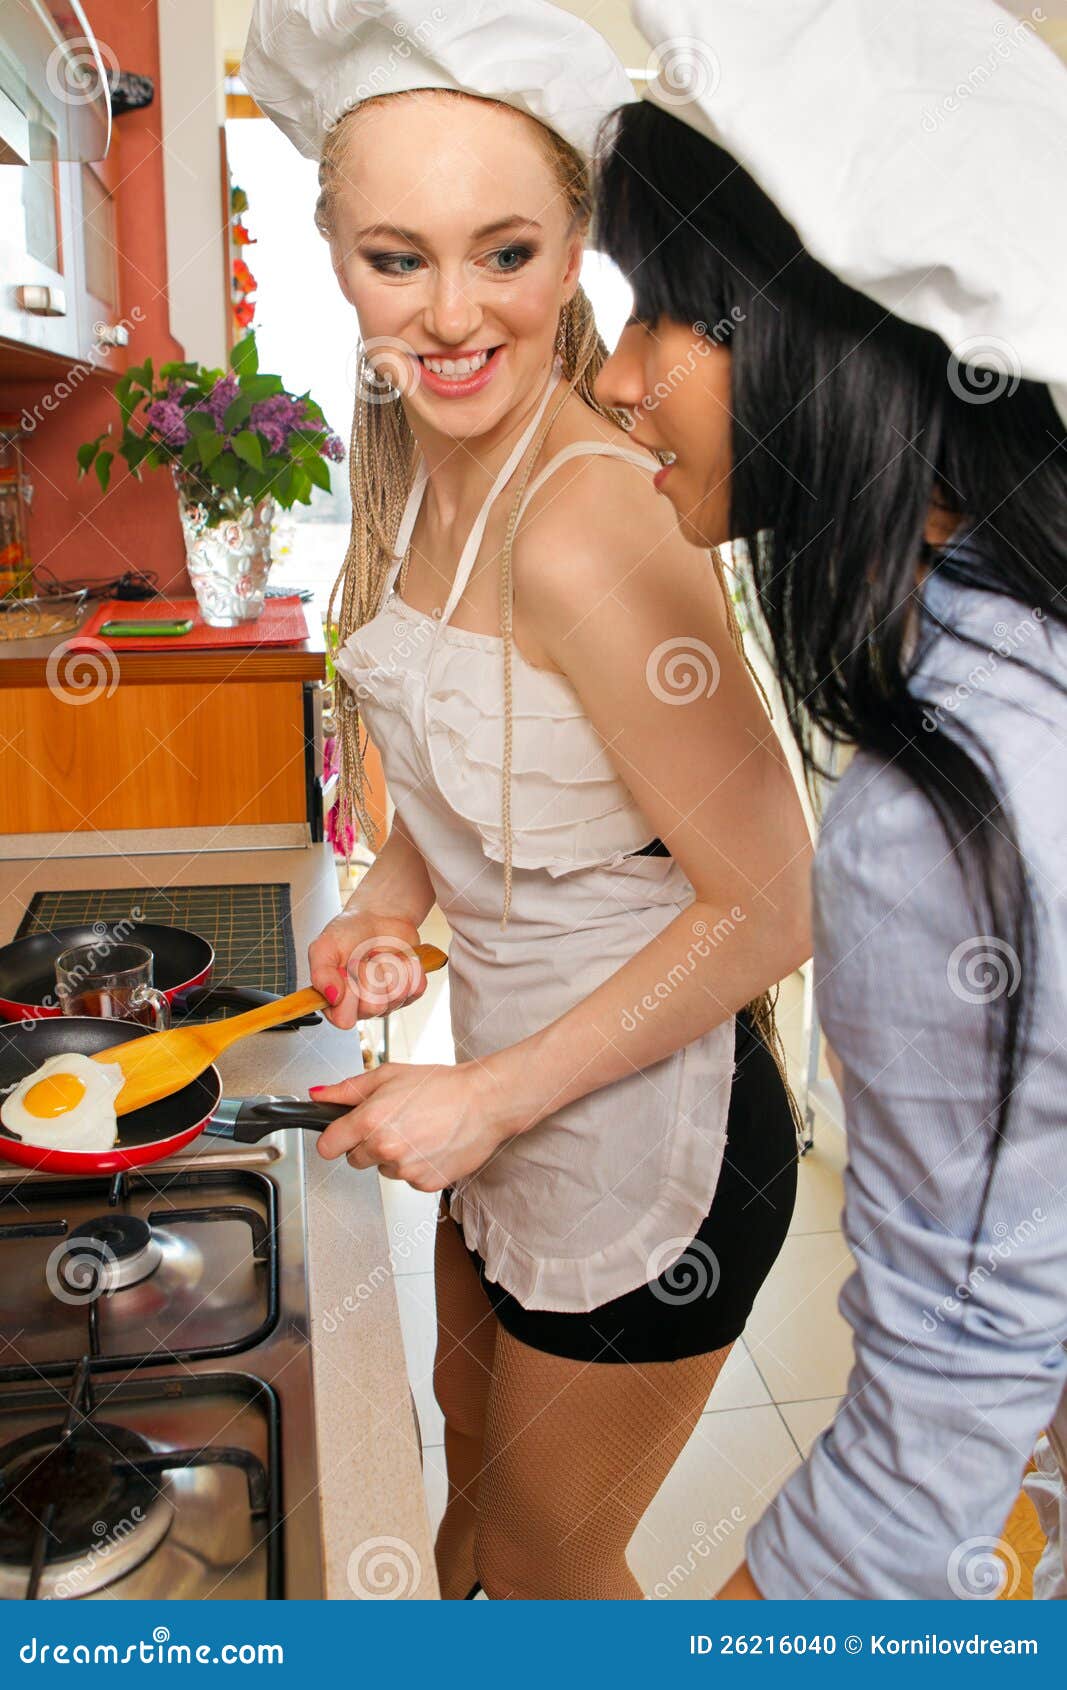 Women In Kitchen Stock Photo Image Of Attractive